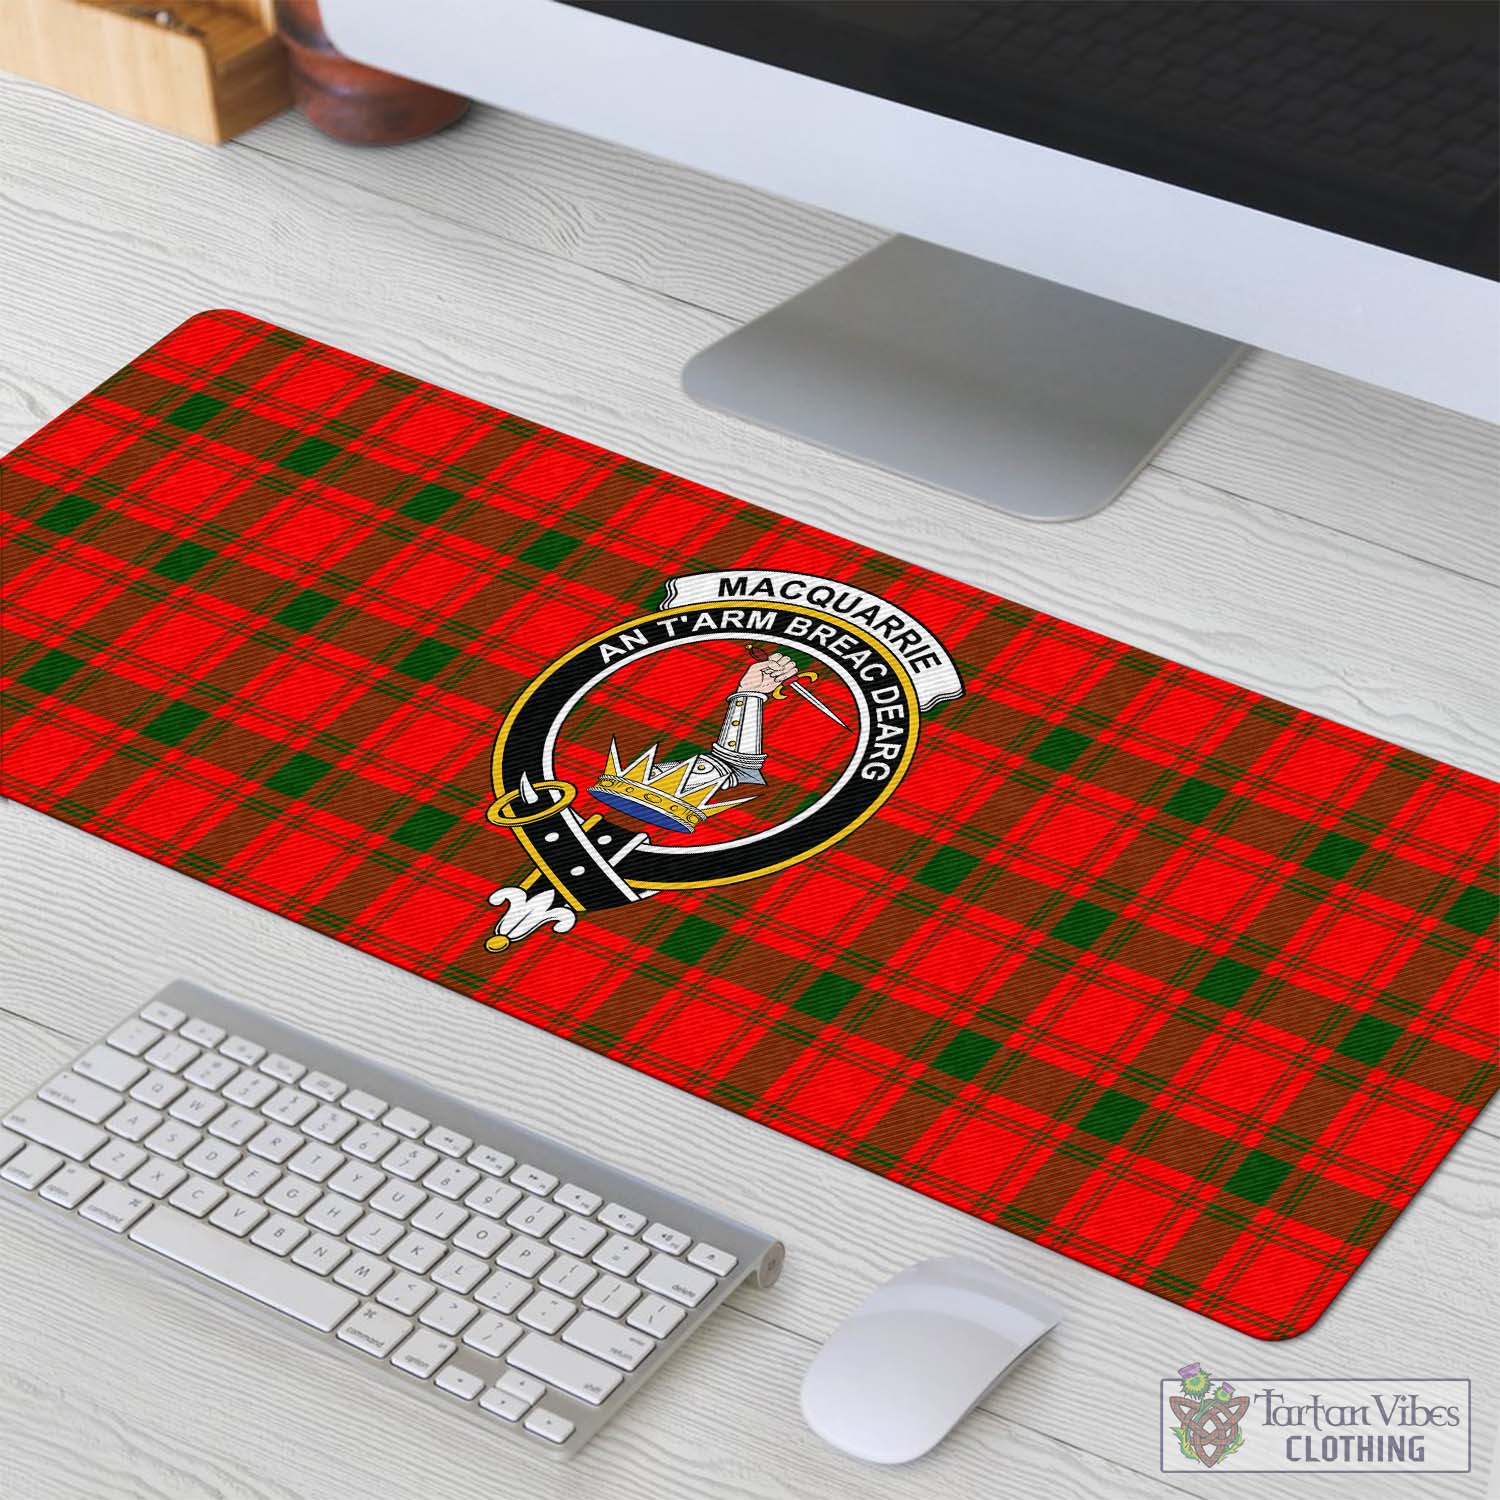 Tartan Vibes Clothing MacQuarrie Modern Tartan Mouse Pad with Family Crest